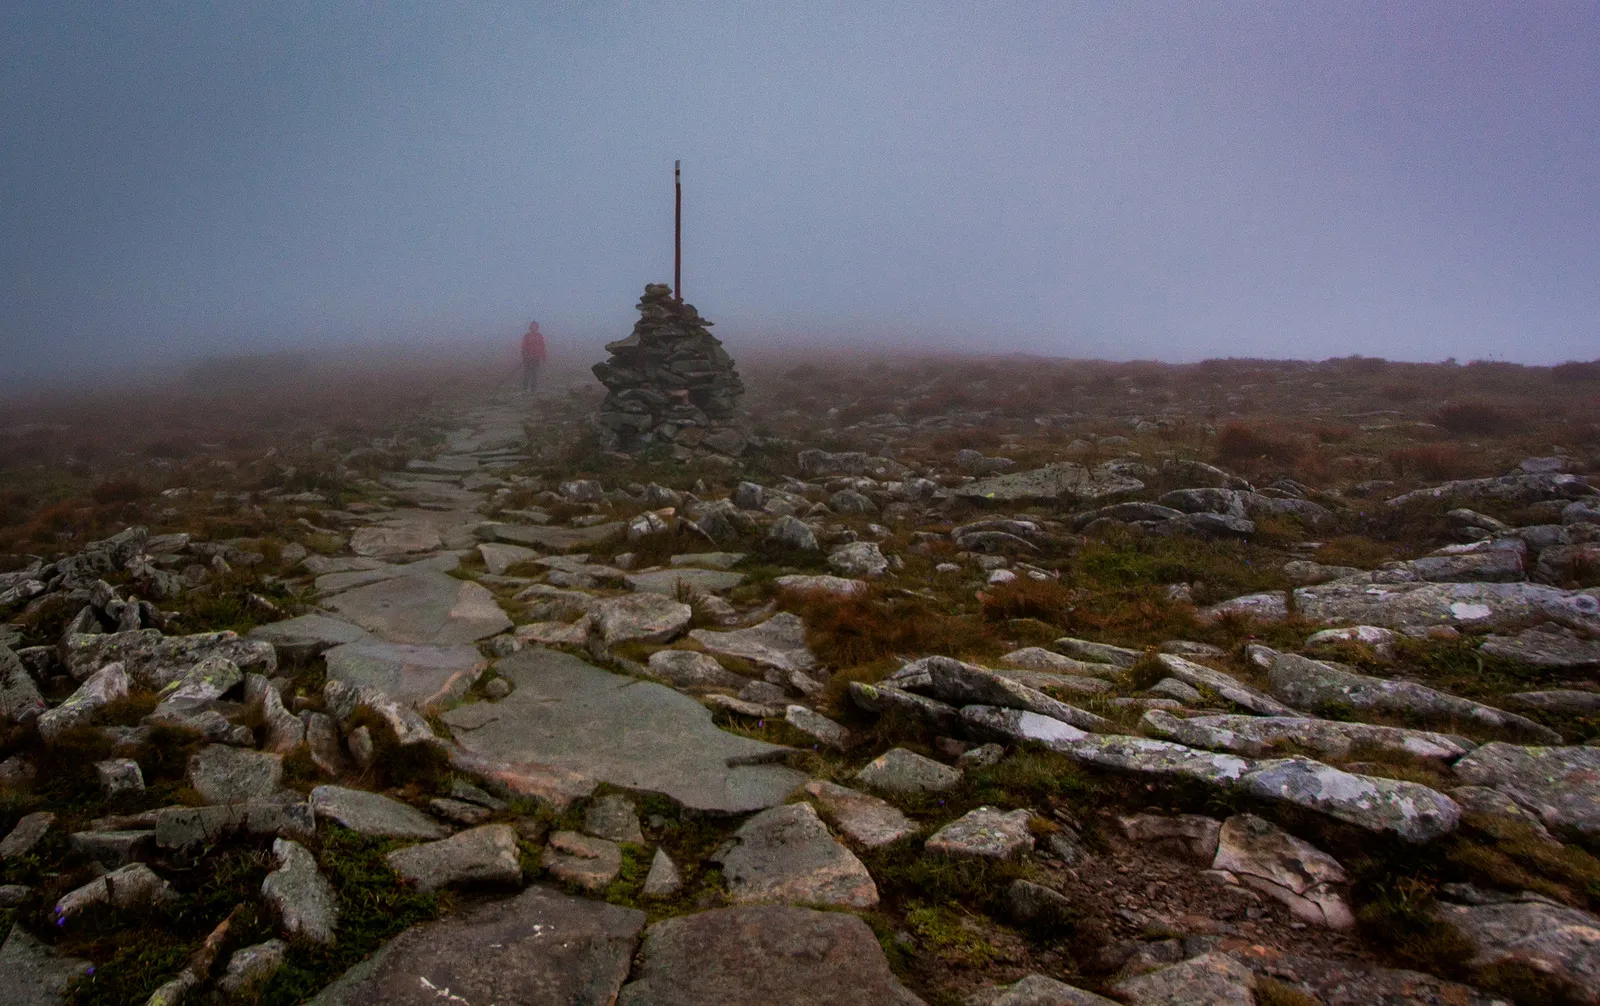 Fog and a rocky path on the ascent to the summit!